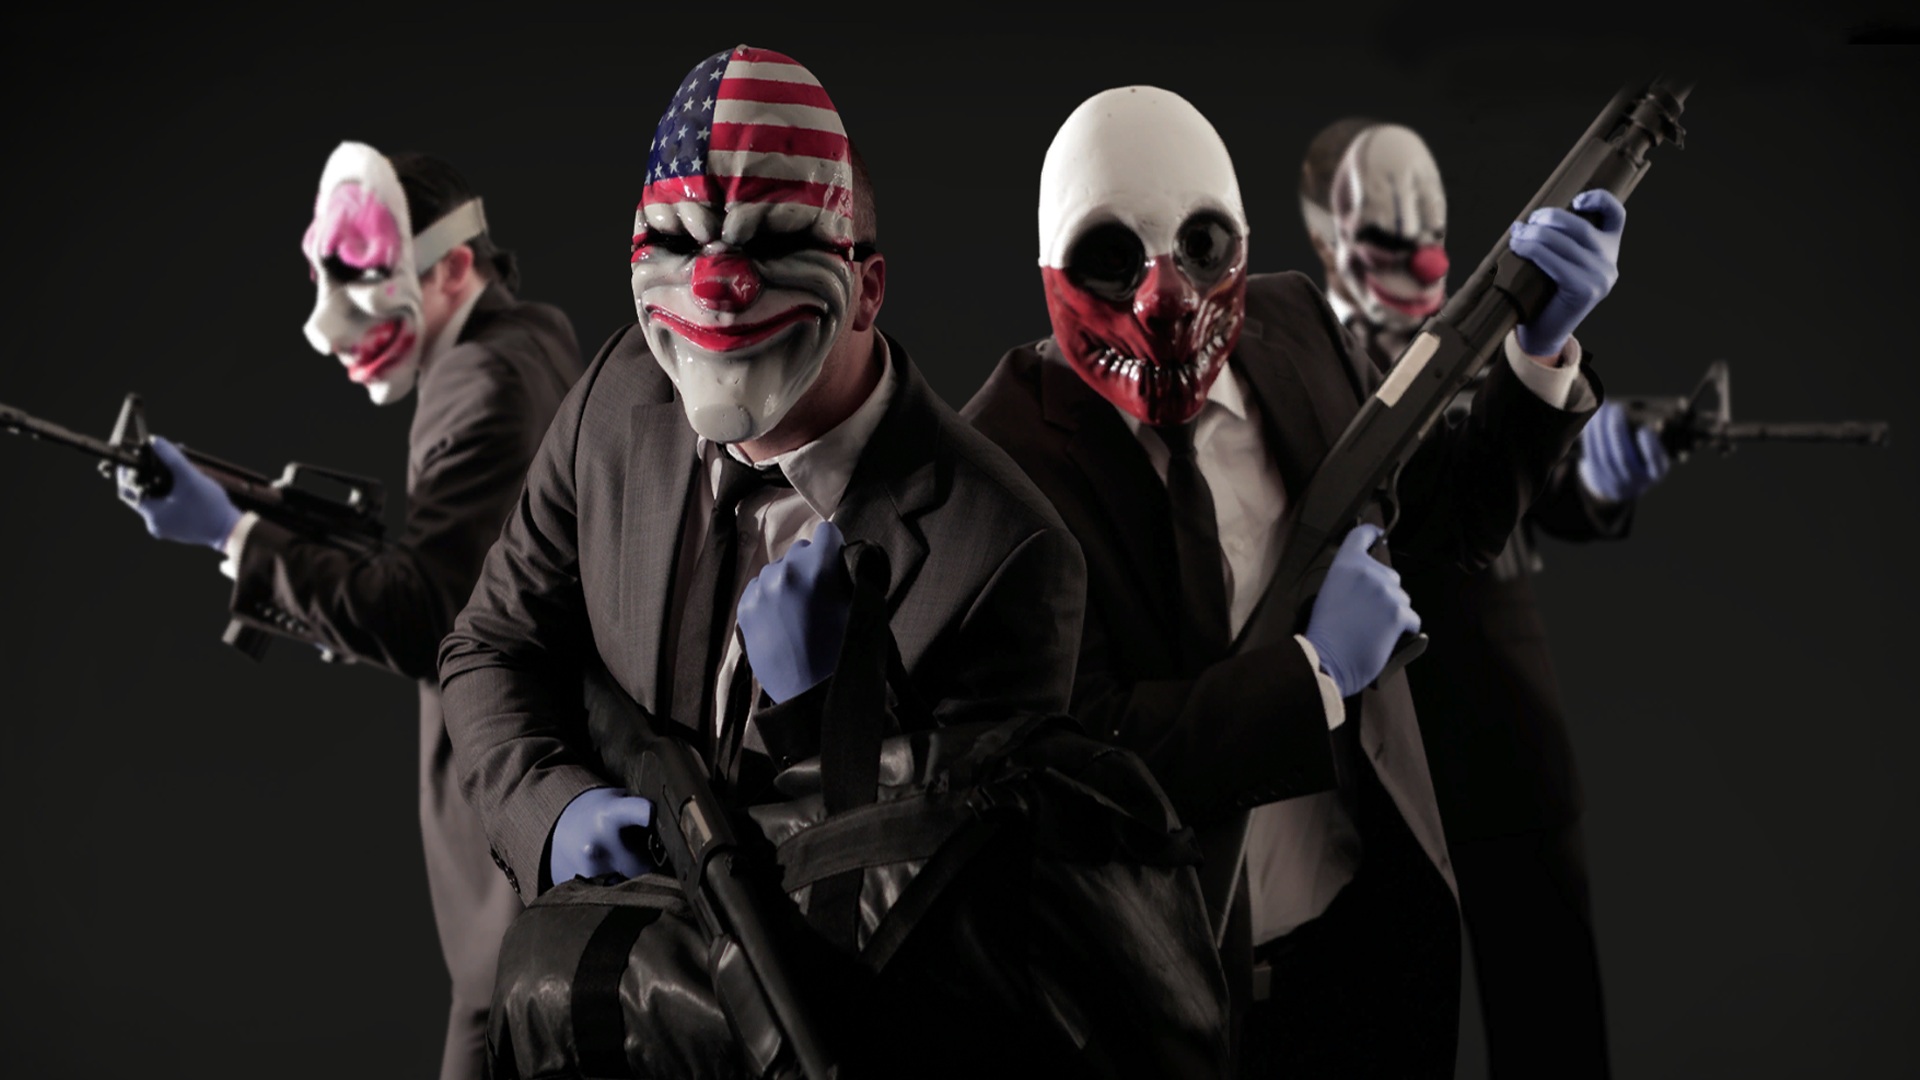 payday 2 free download pc